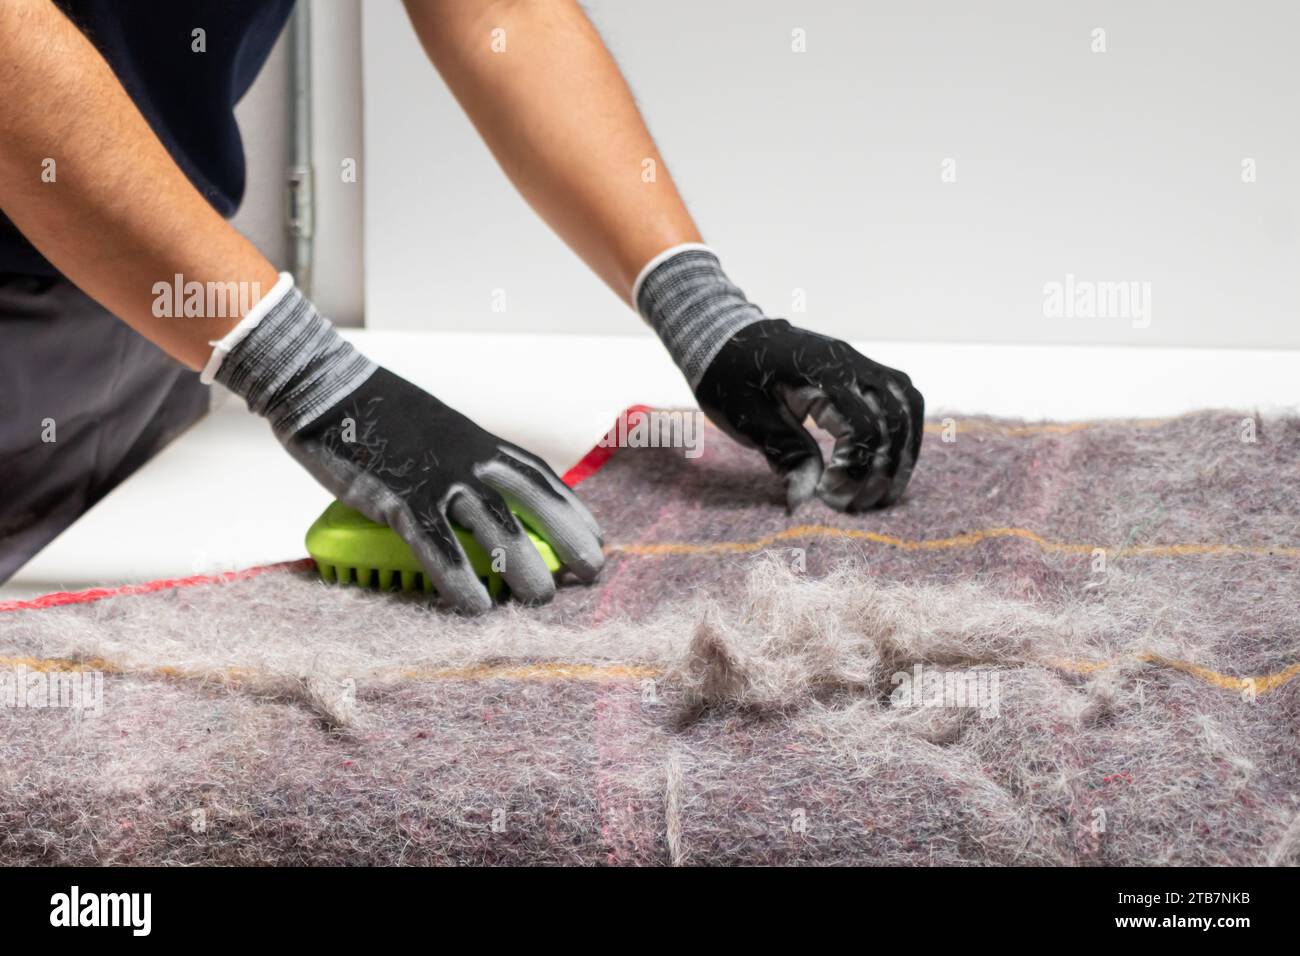 Side view of cropped unrecognizable person's hands in gloves using a fur removal tool to clean a pet hair-covered blanket Stock Photo